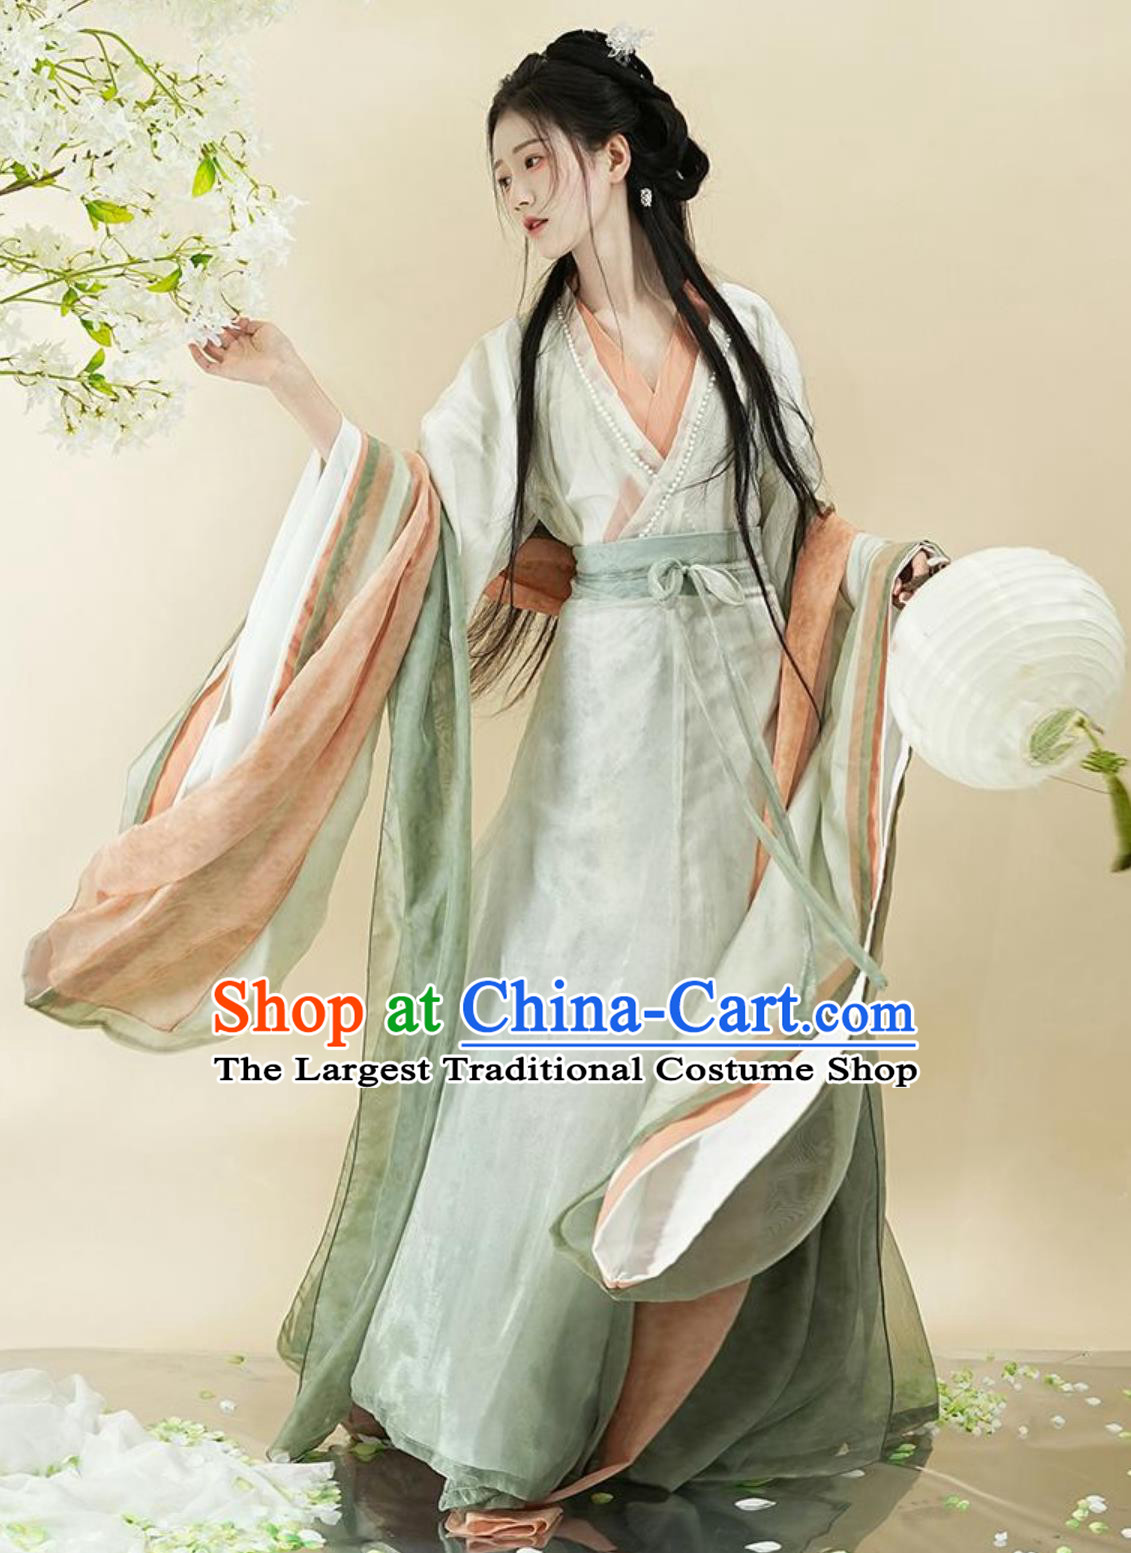 Ancient China Southern and Northern Dynasties Hanfu Clothing Online Buy Traditional Chinese Princess Costume Female Dress